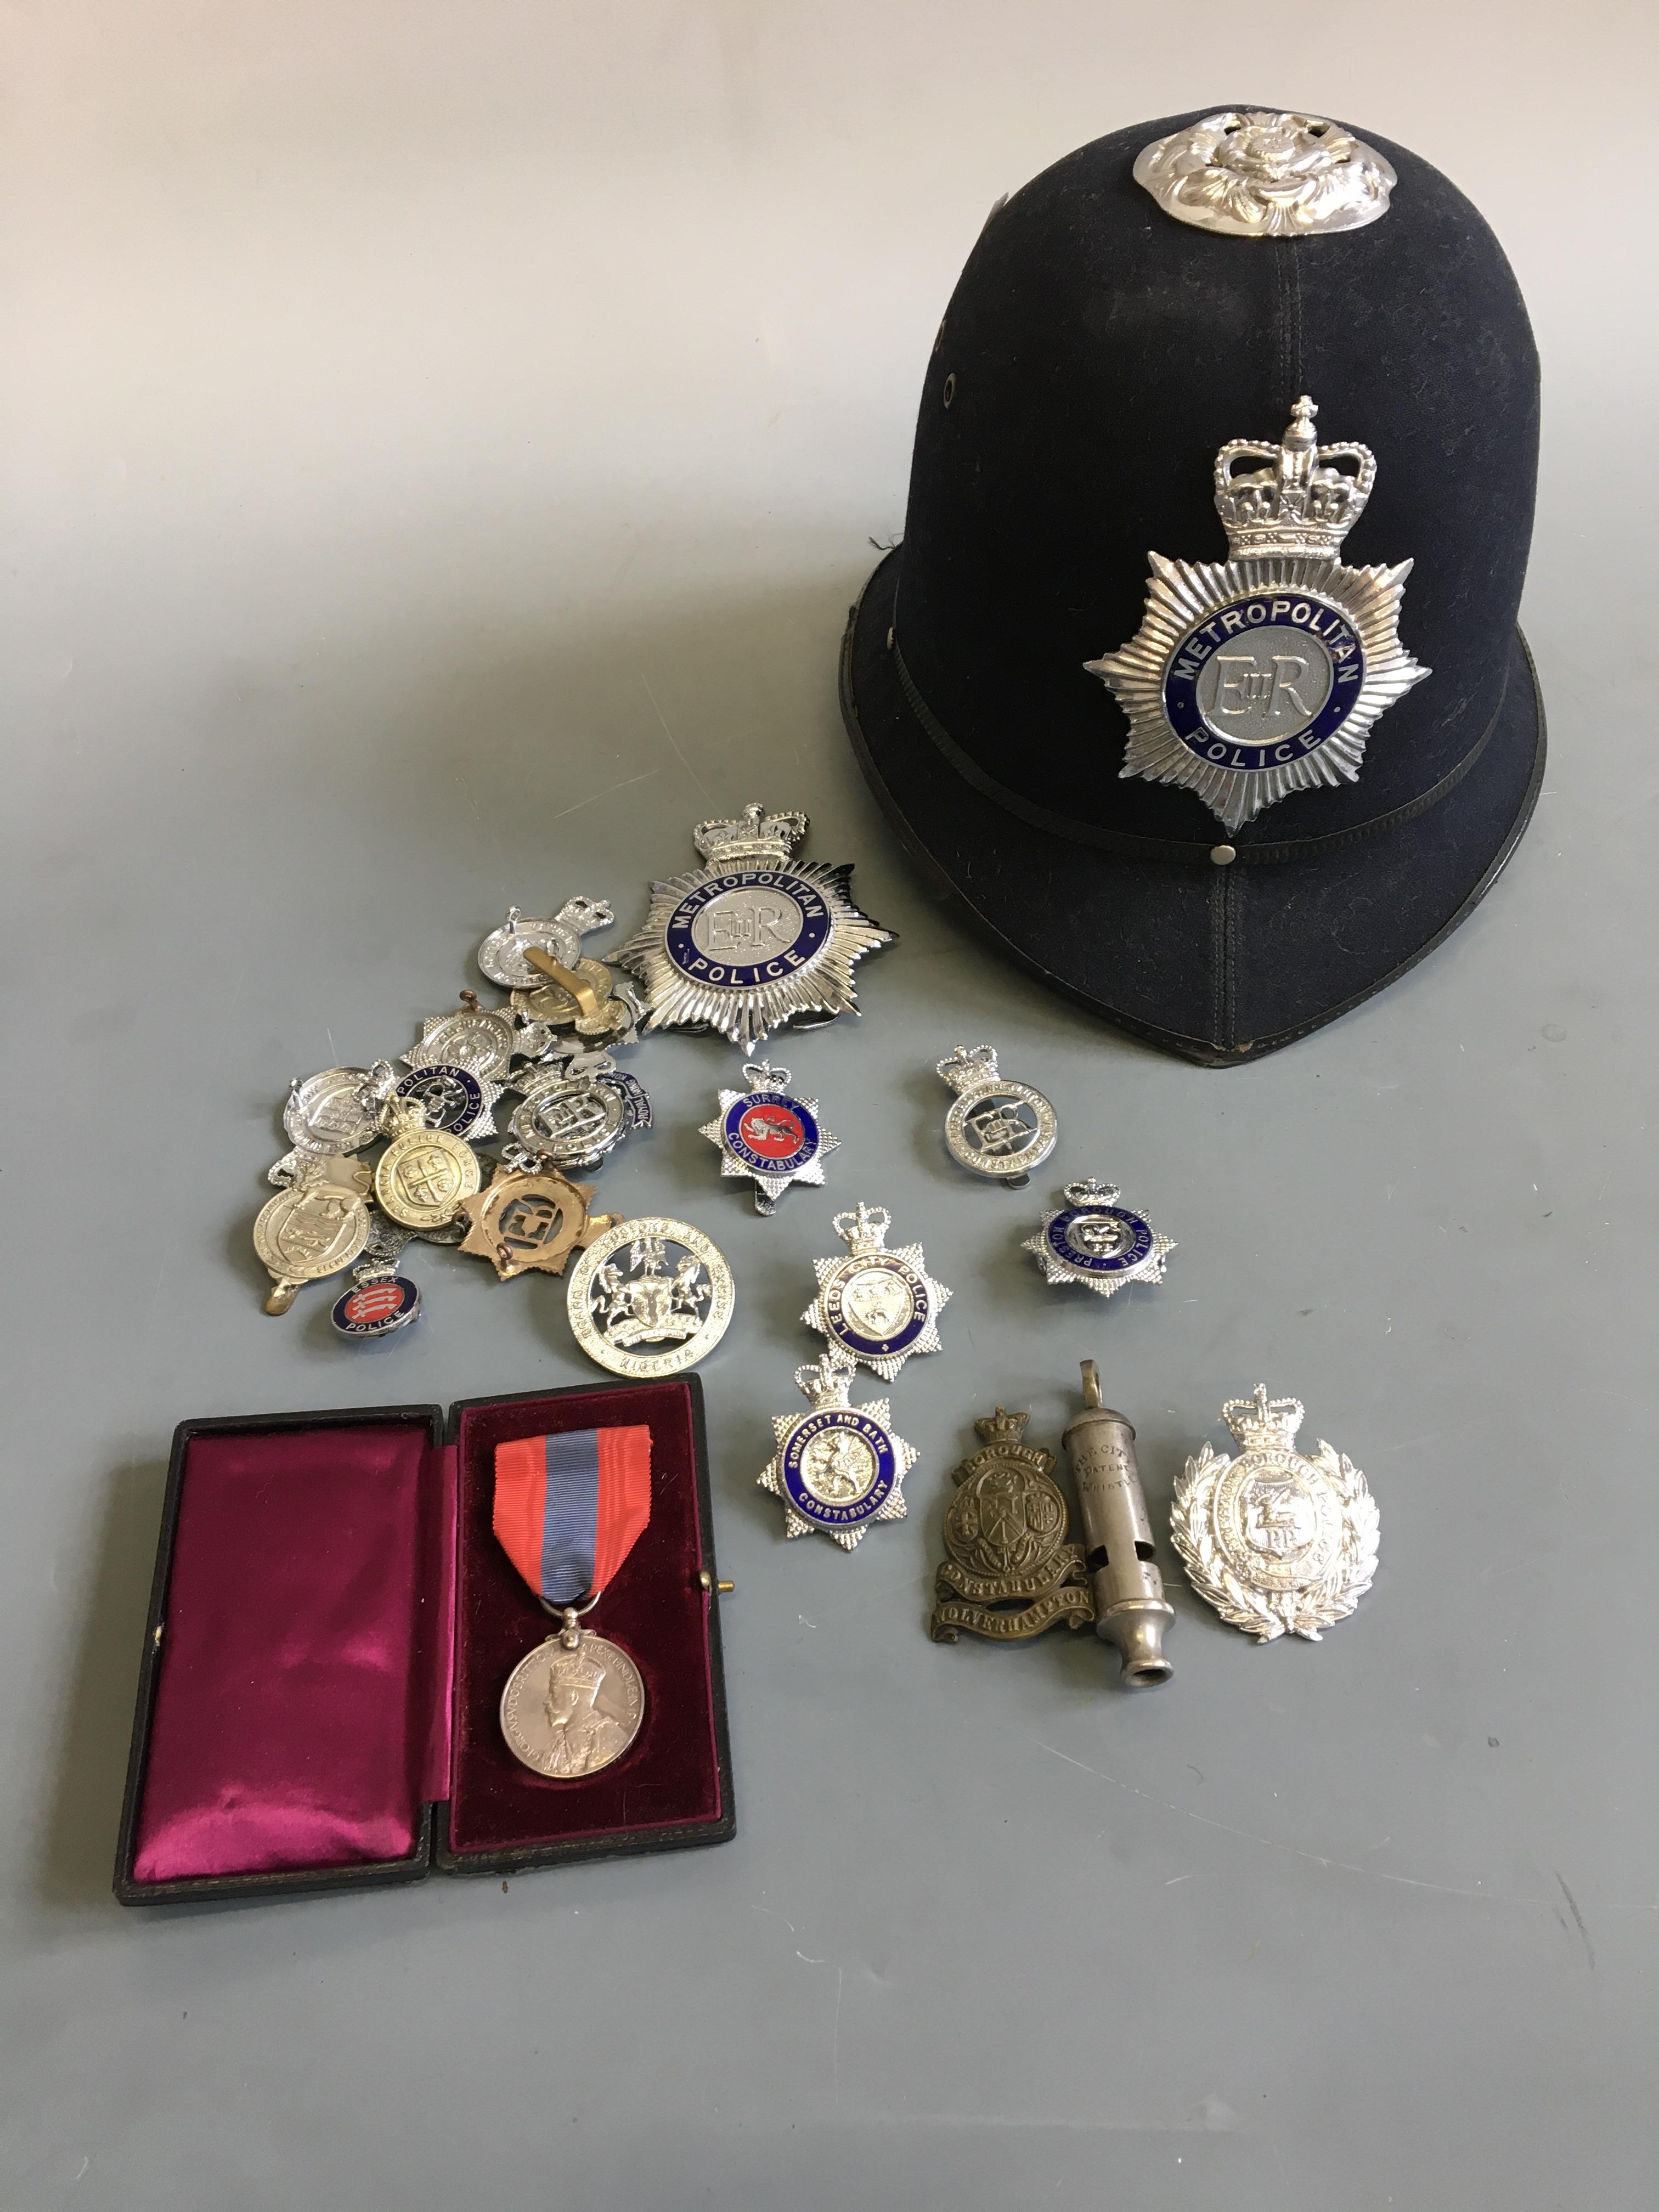 A collection of policeman’s items including Imperial Service medal belonging to Frederick Edward